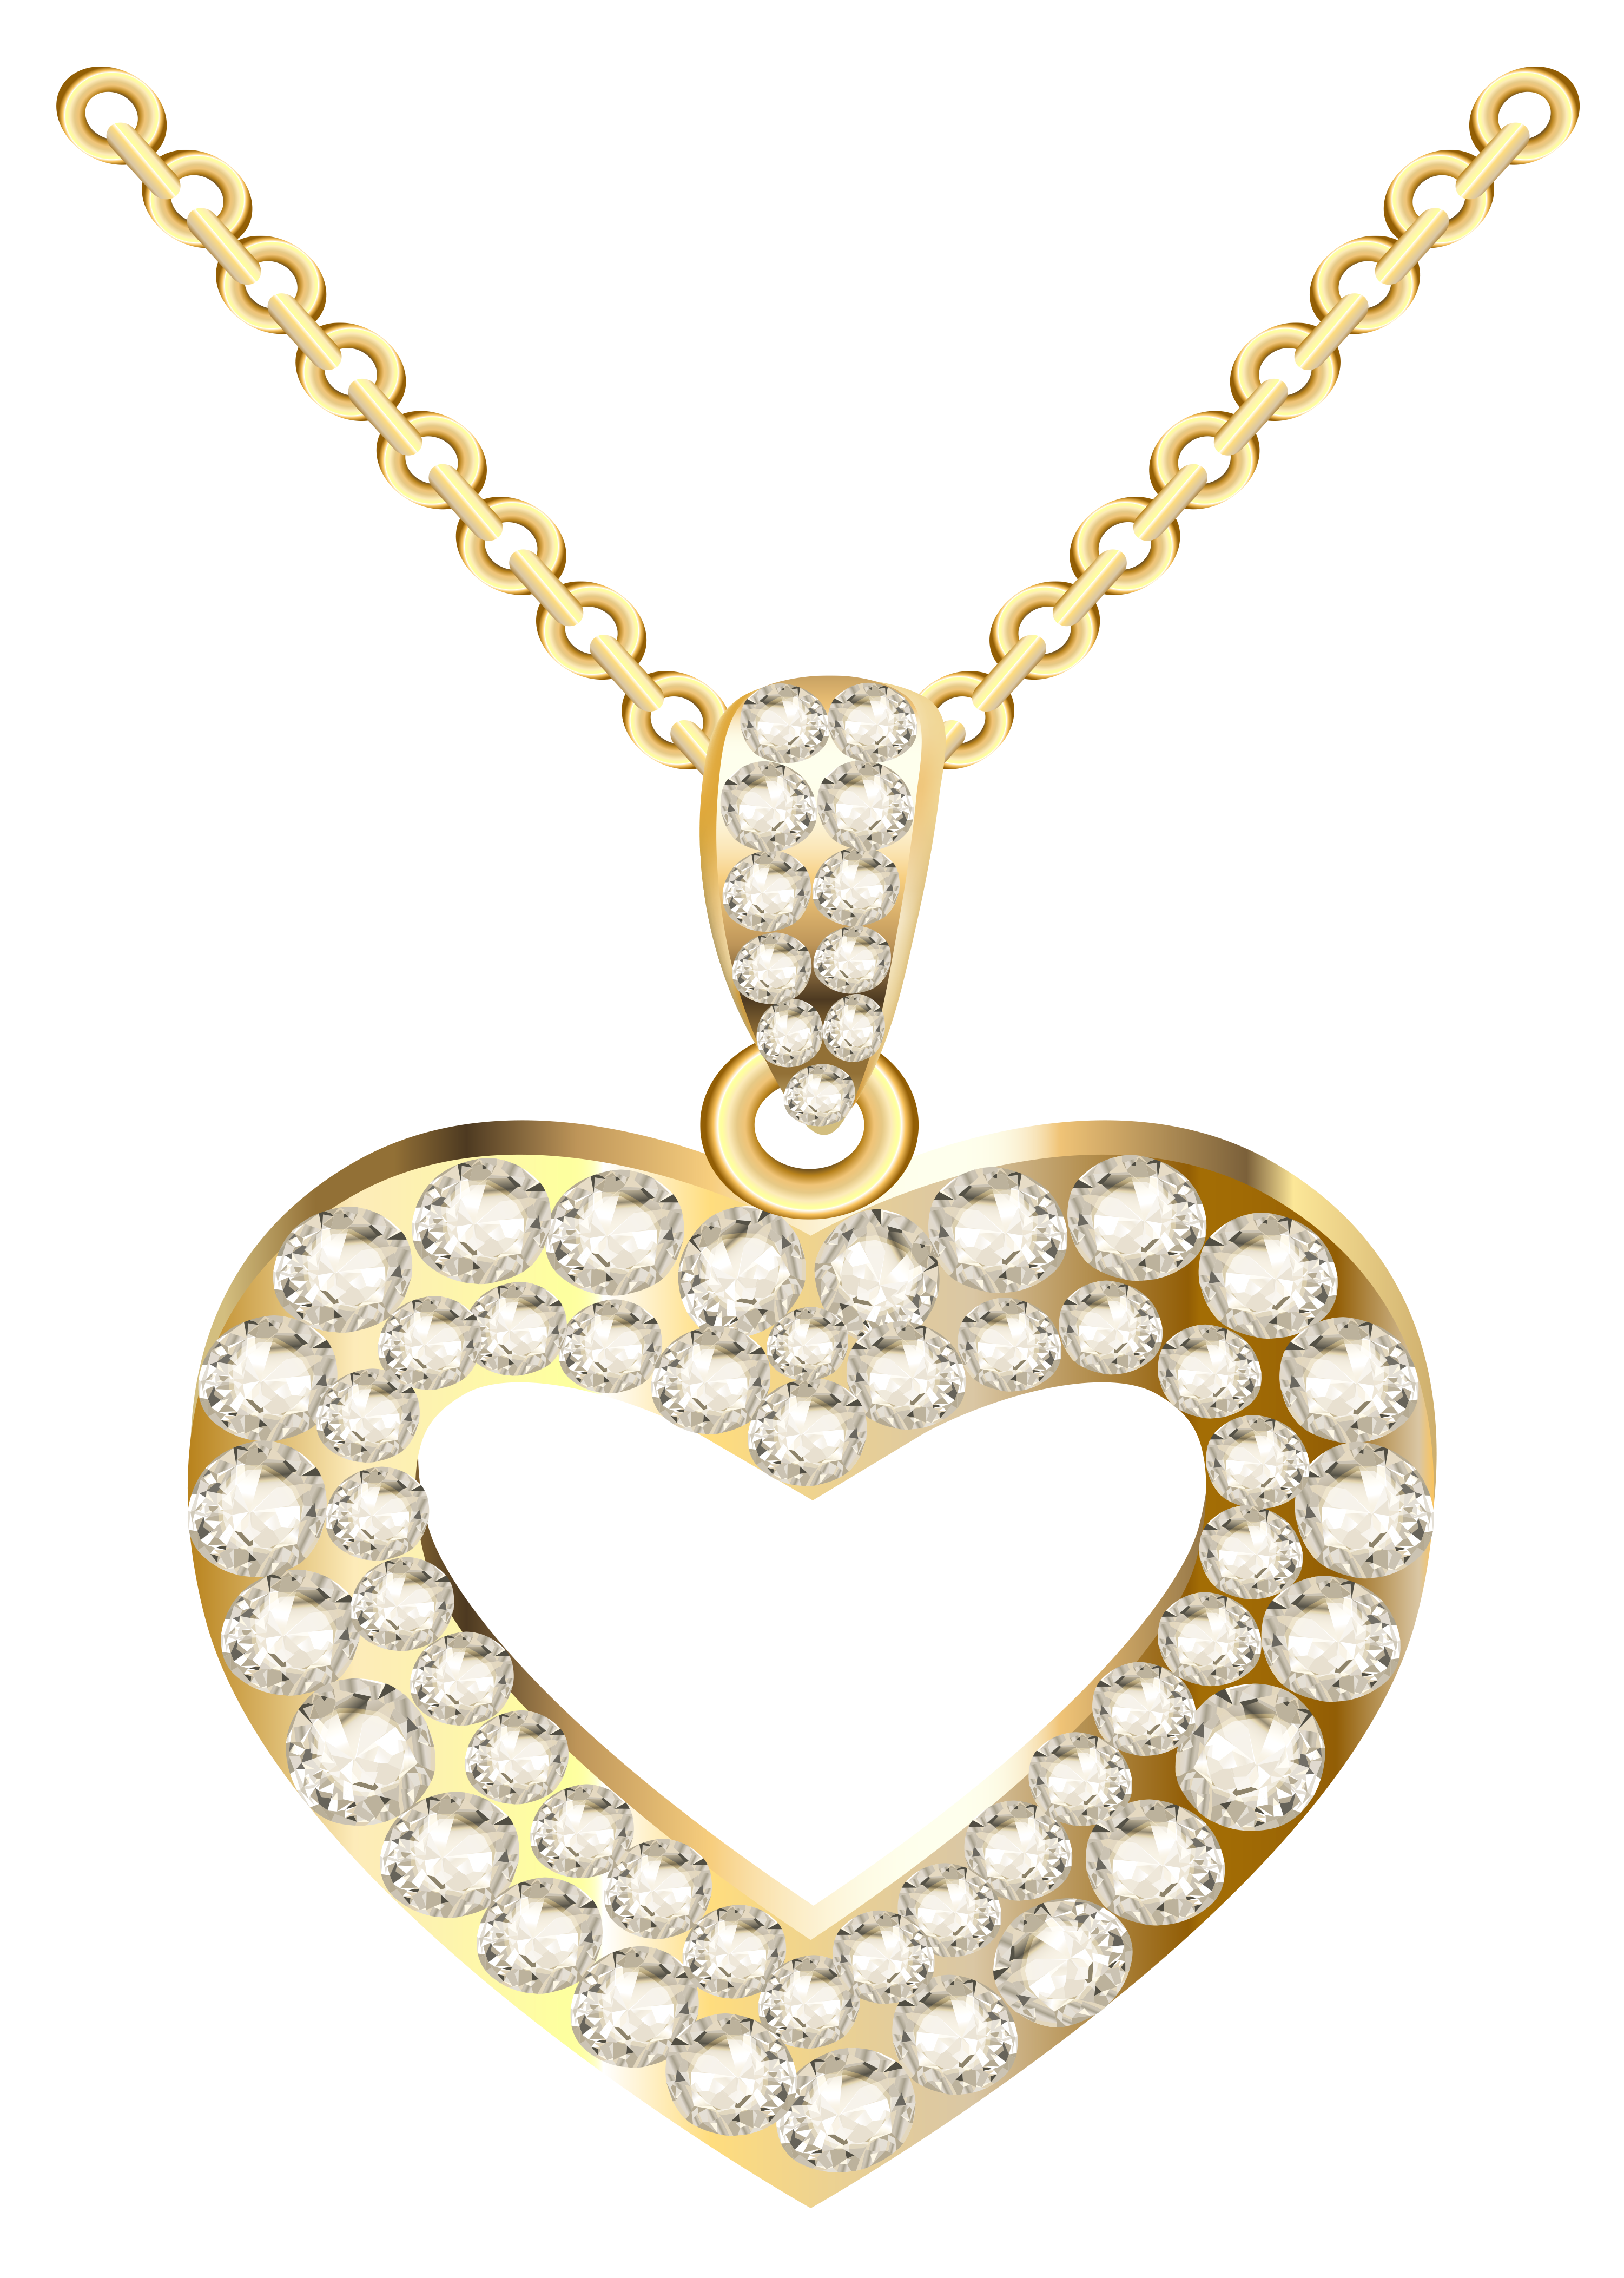 Golden Heart Necklace with Diamonds PNG Clipart